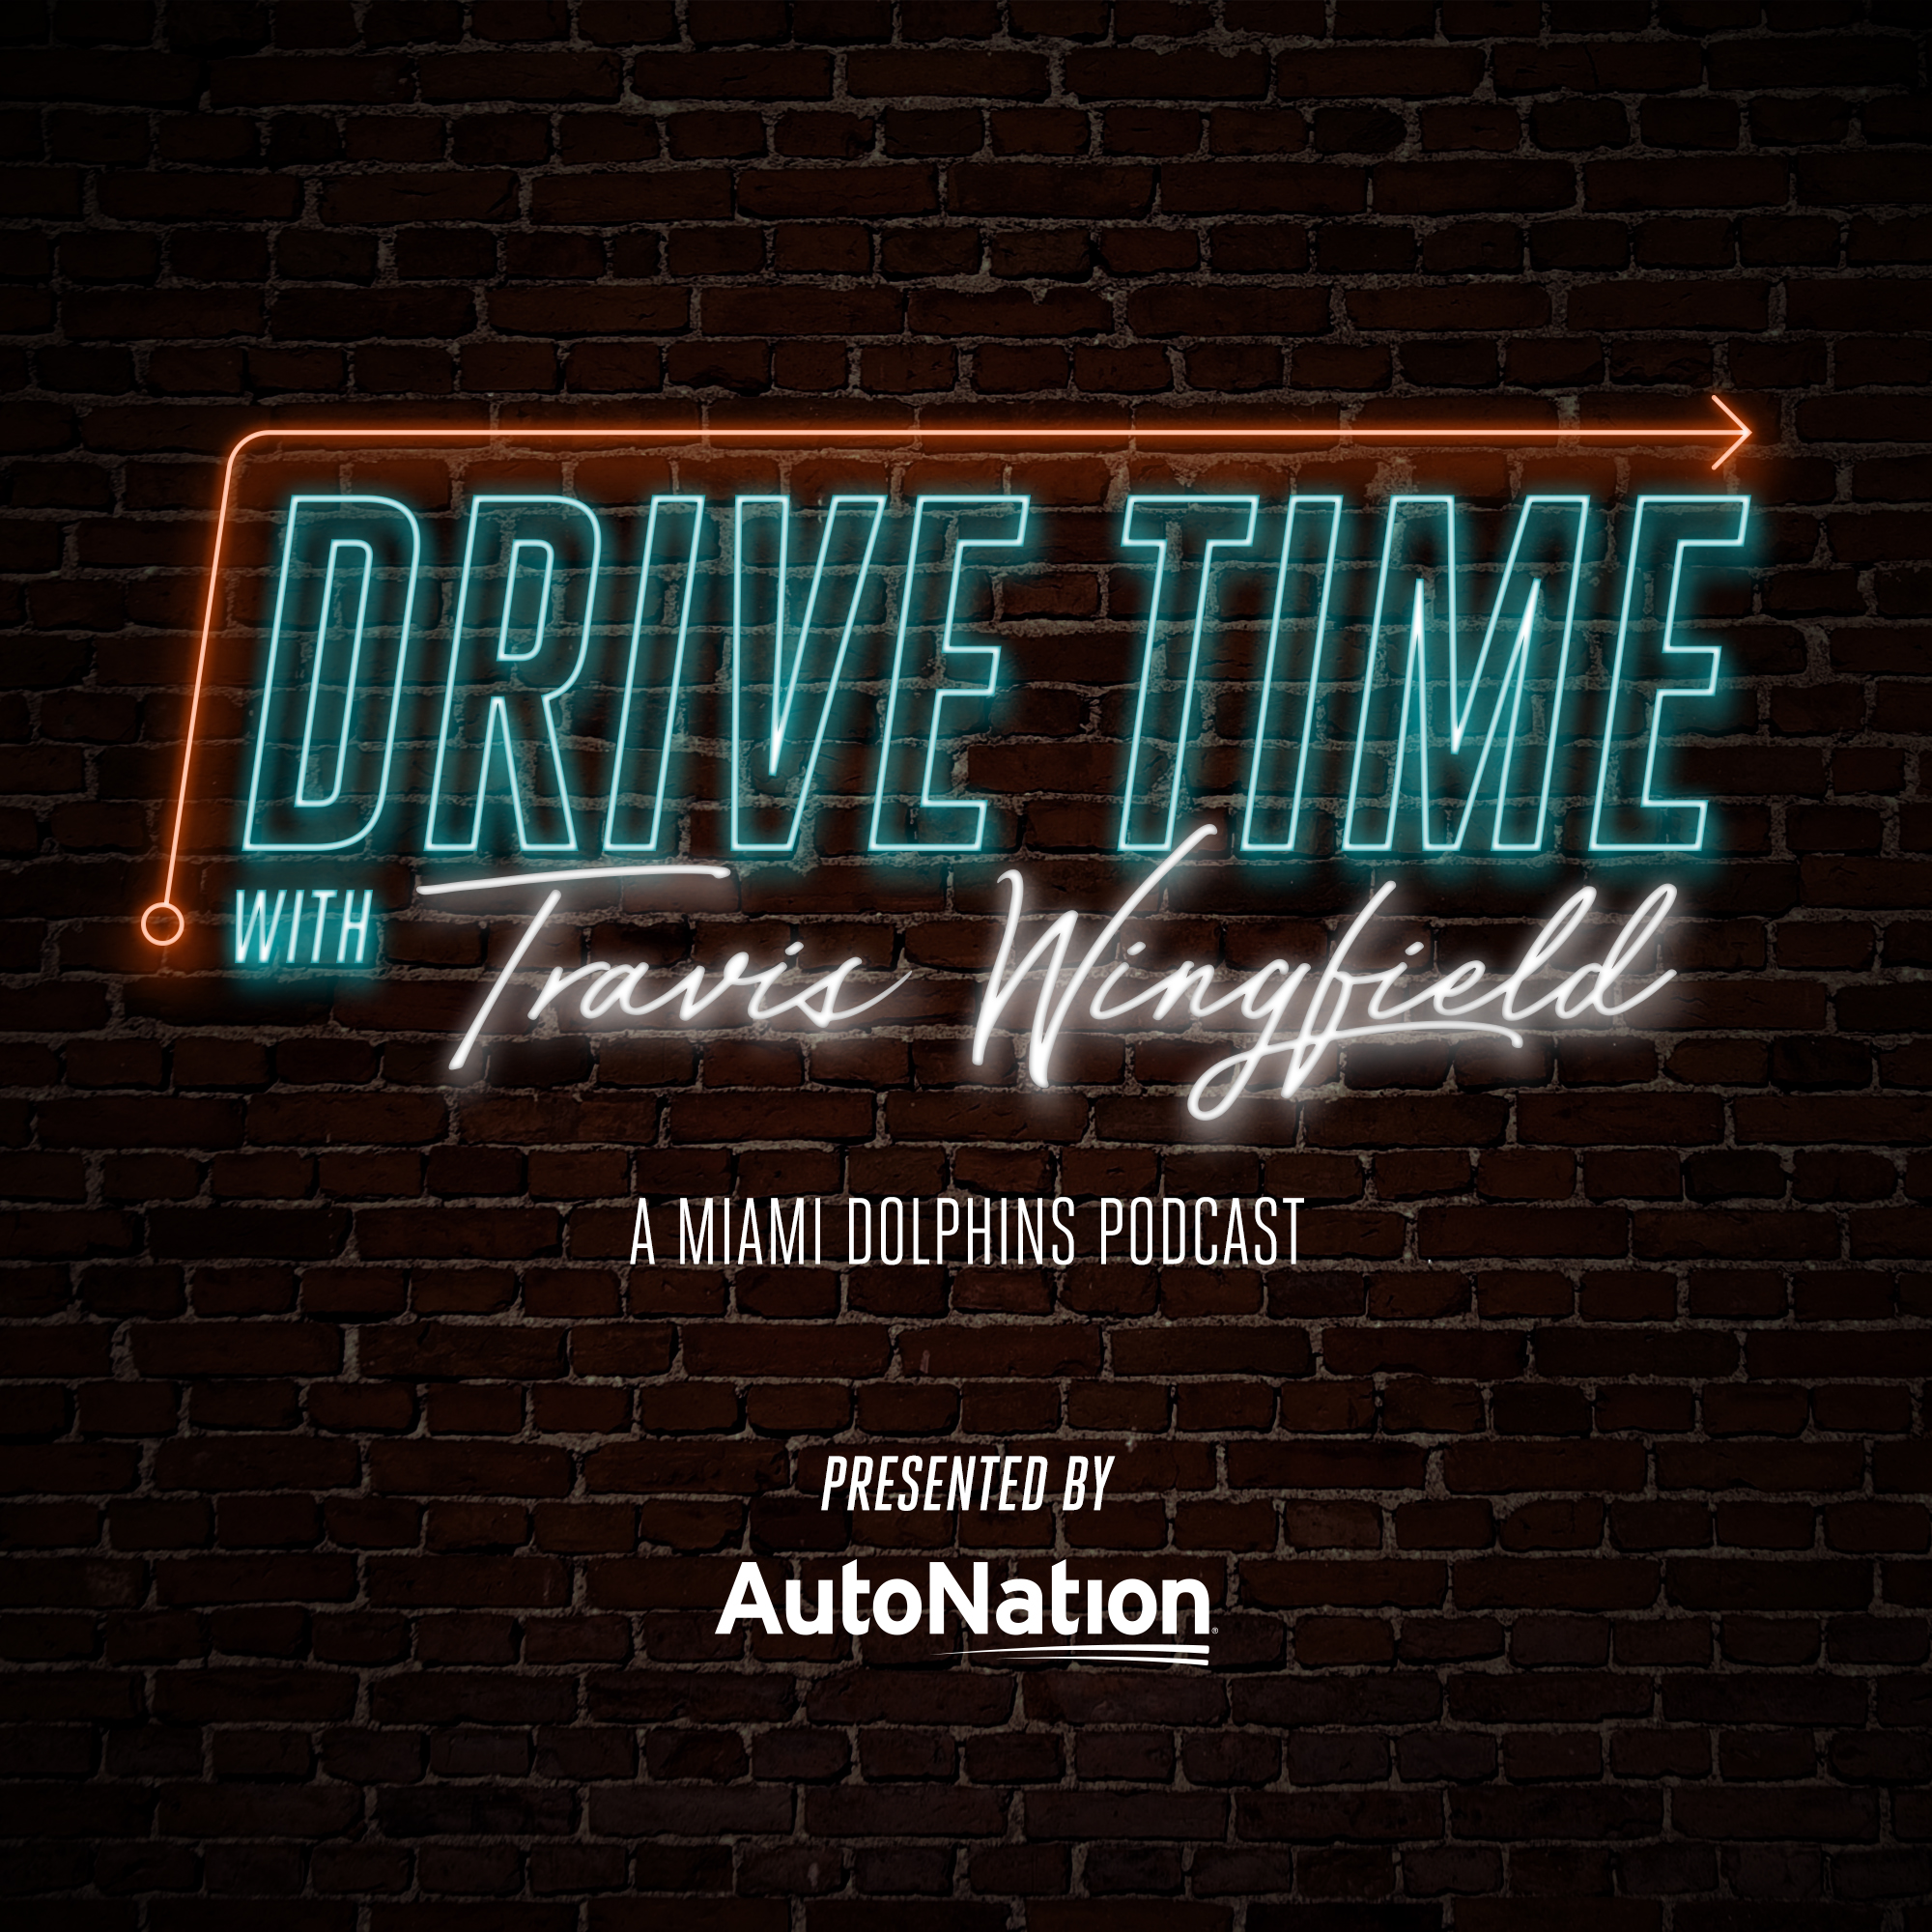 Drive Time: The Chop Robinson Episode